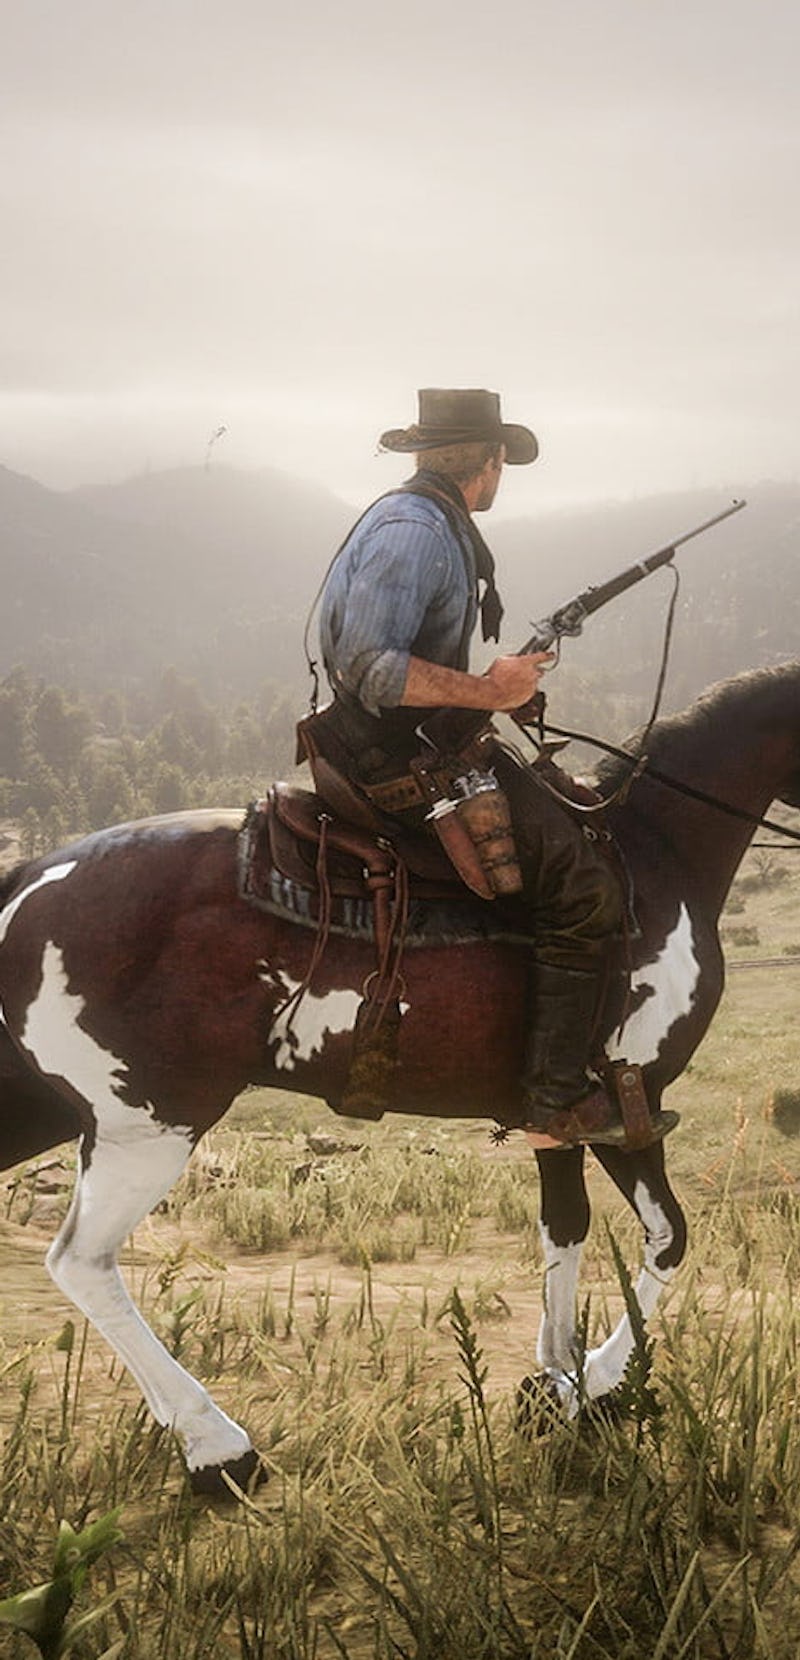 A cowboy riding a horse in "Red Dead Redemption II"